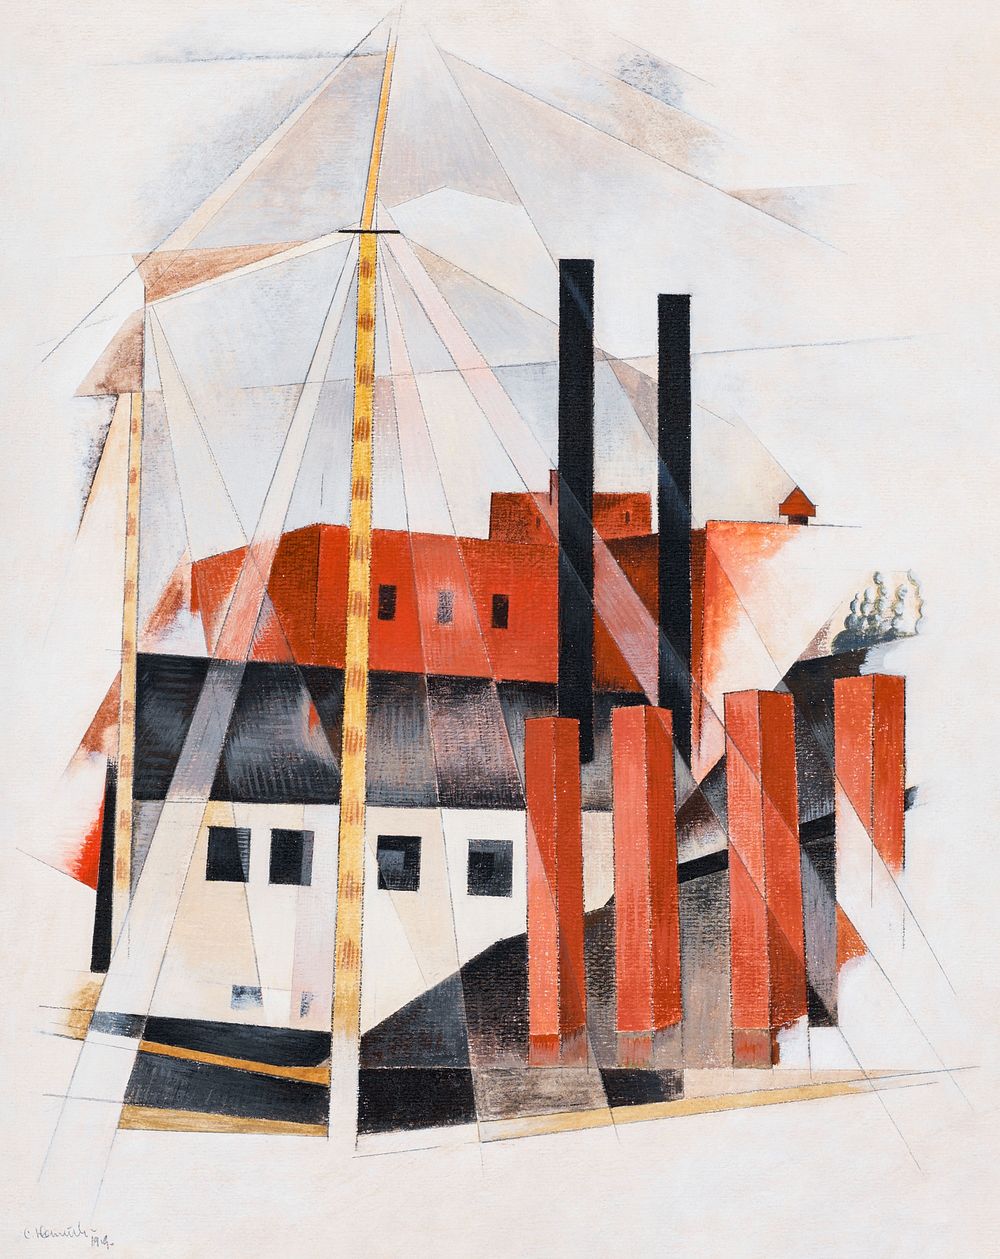 Piano Mover's Holiday (1919) painting in high resolution by Charles Demuth. Original from The Barnes Foundation. Digitally…